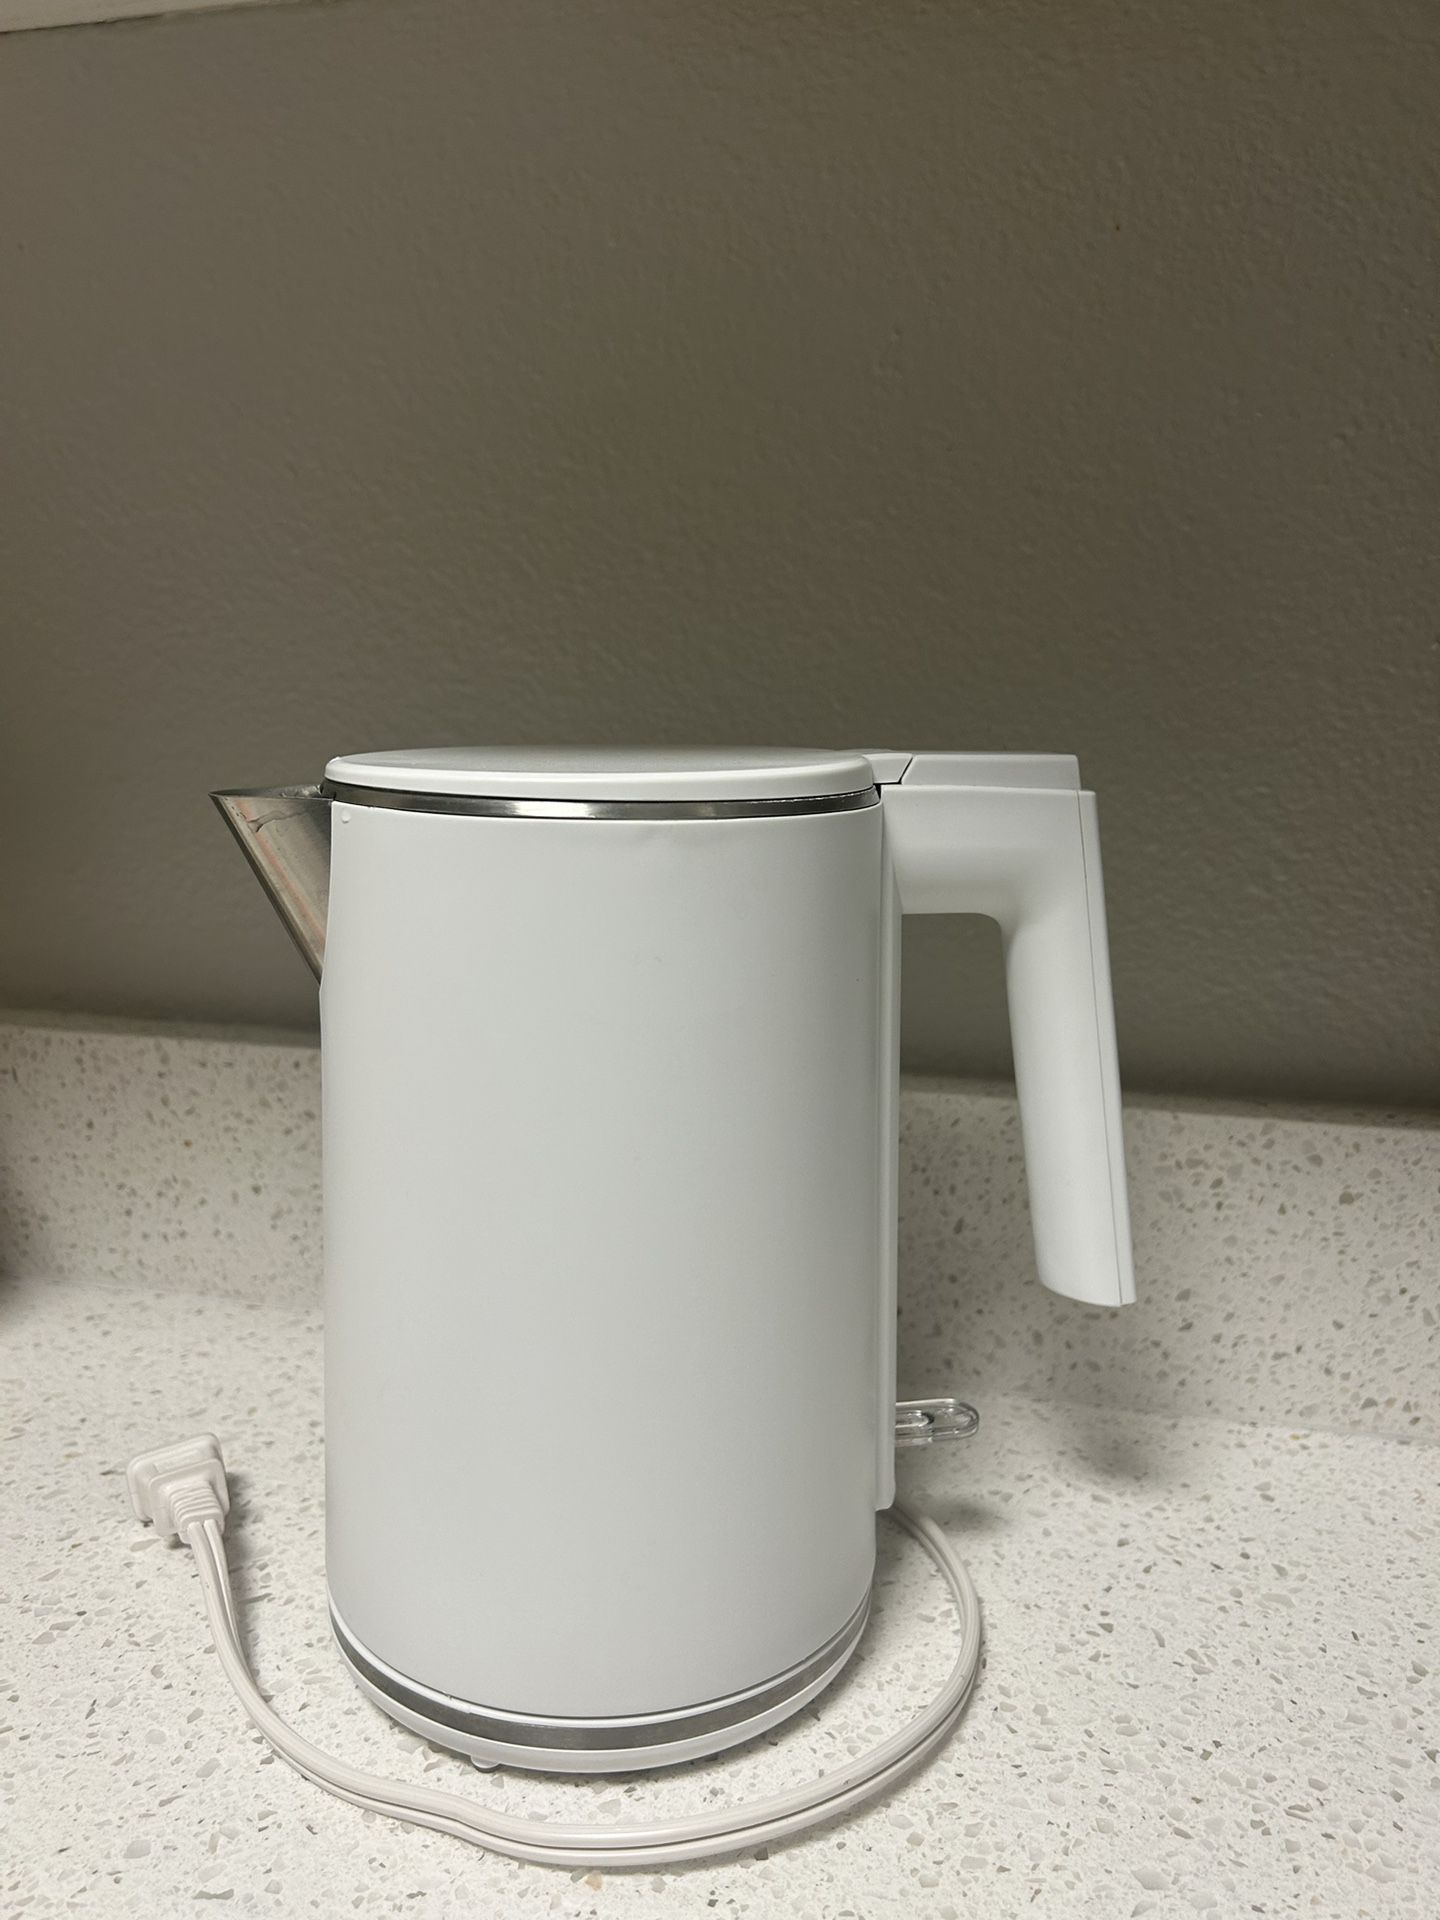 White Electric Kettle 